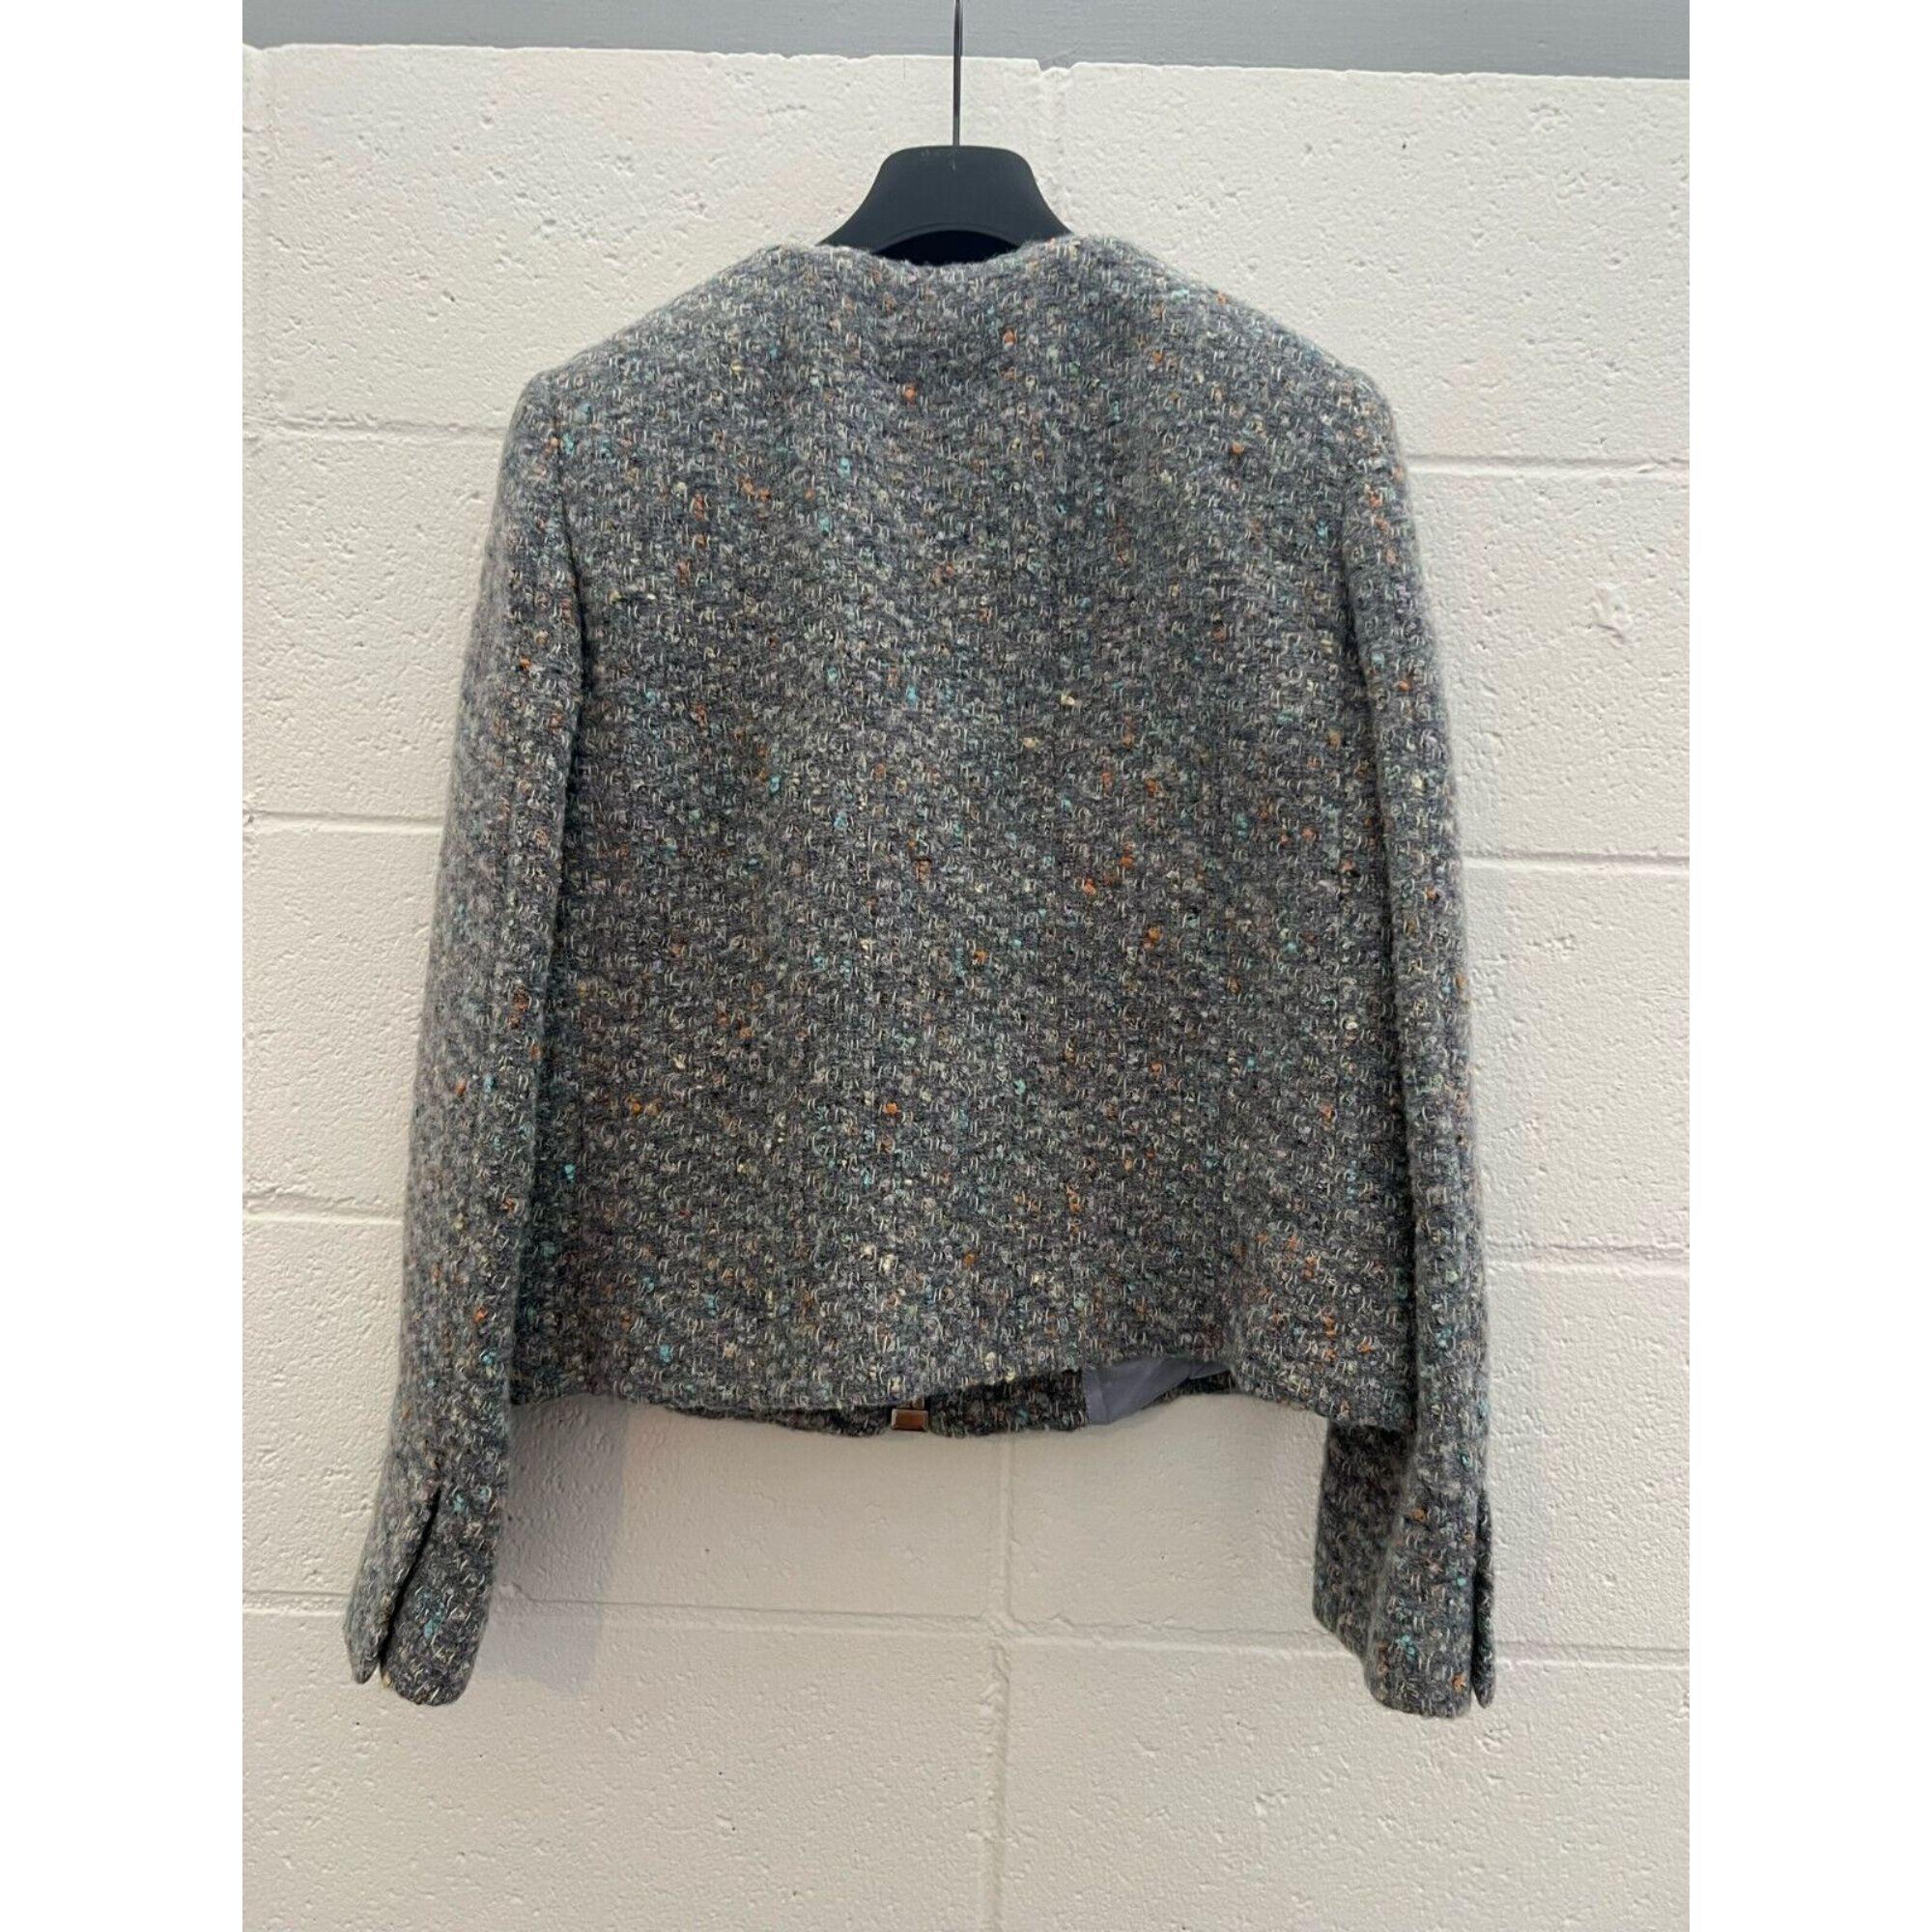 AW20 Moschino Couture Boucle Wool Jacket by Jeremy Scott, Size US 10 For Sale 9